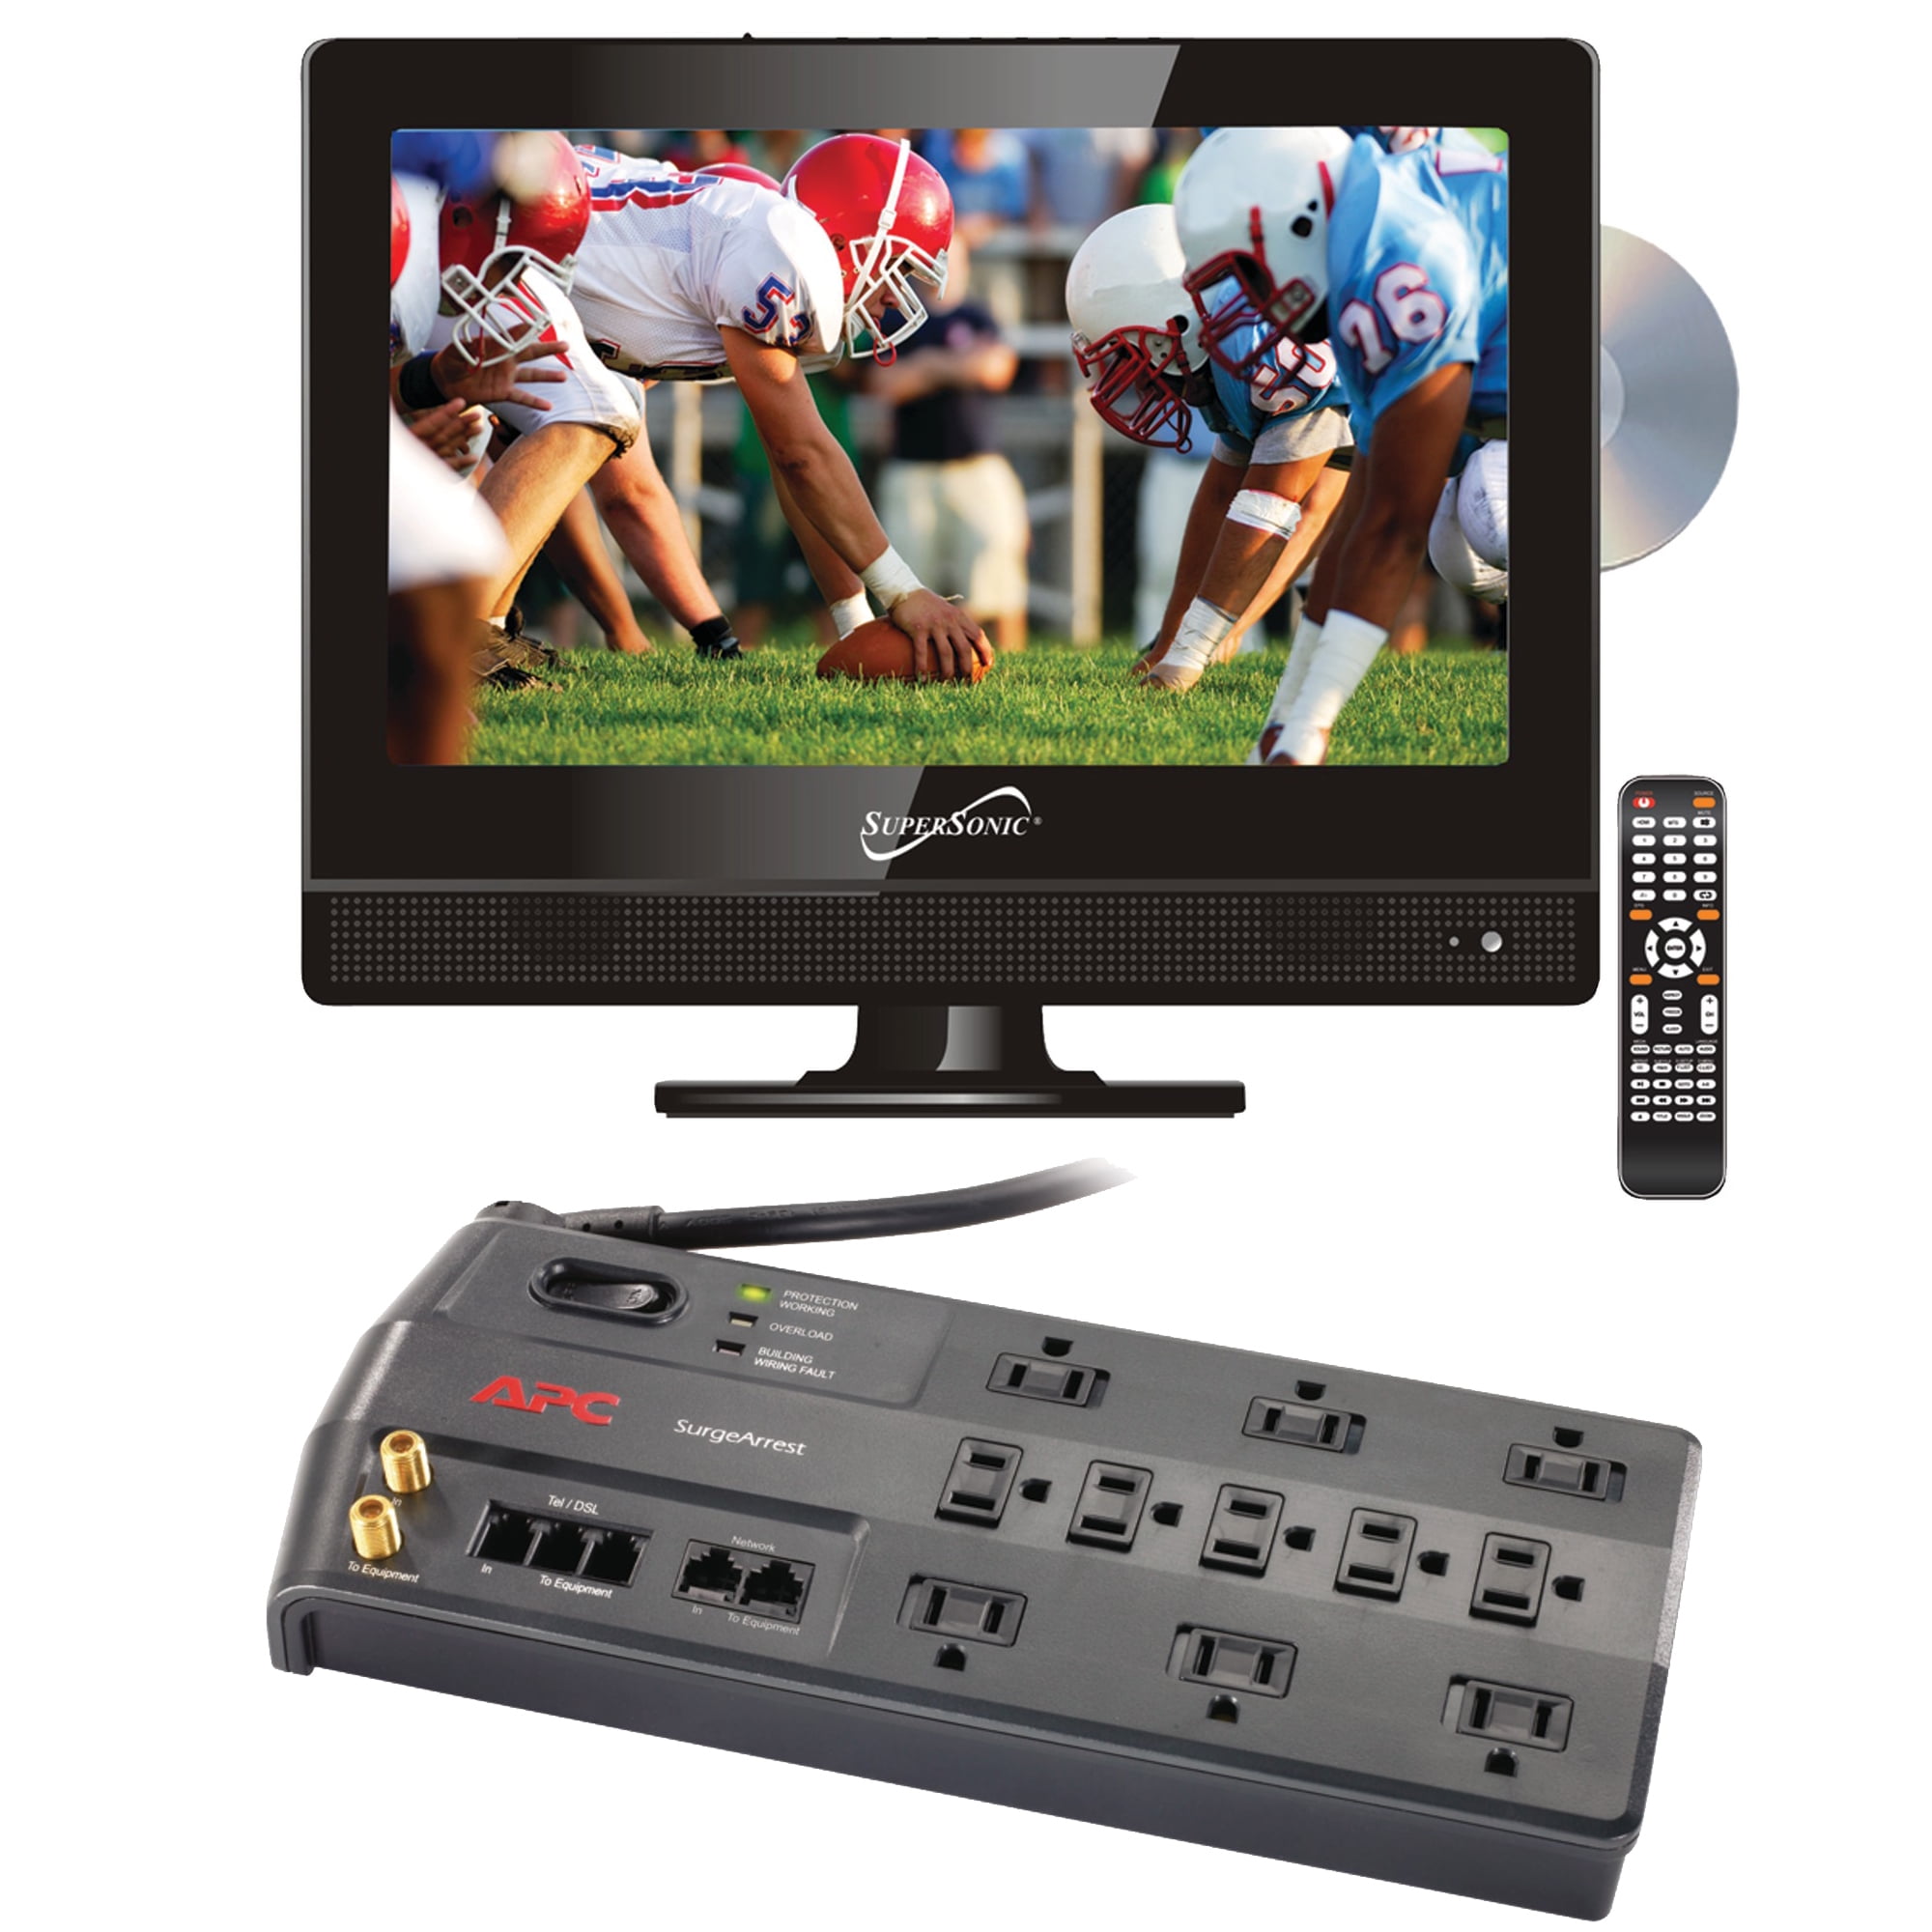 Supersonic SC-1312 13.3" 720p Widescreen LED HDTV/DVD Combination, AC Ac Dc Tv Dvd Combo For Rv